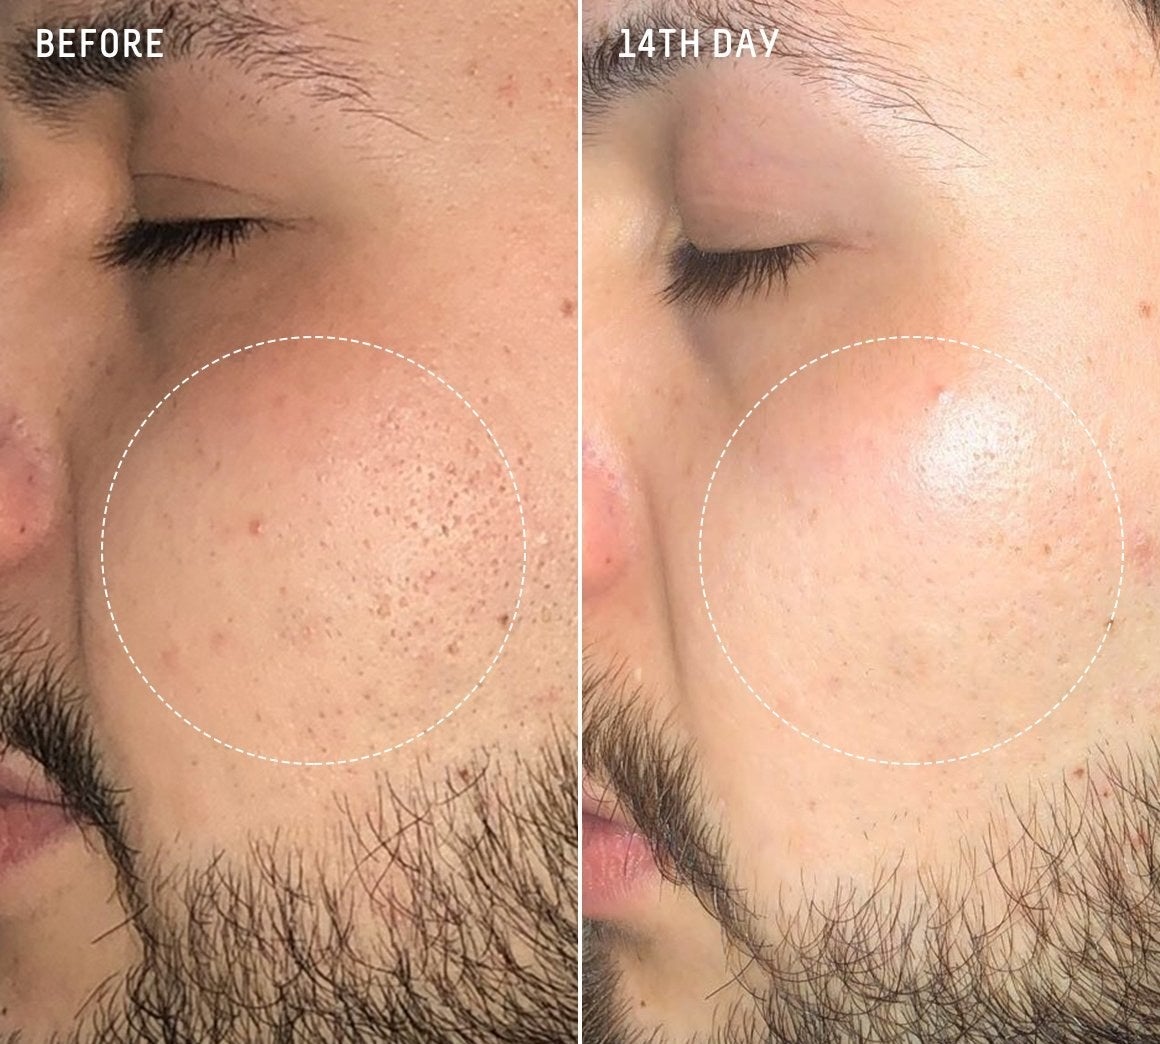 Biossance customer before and after photo showing their skin red and bumpy, then completely soft and smooth after fourteen days of using the serum 